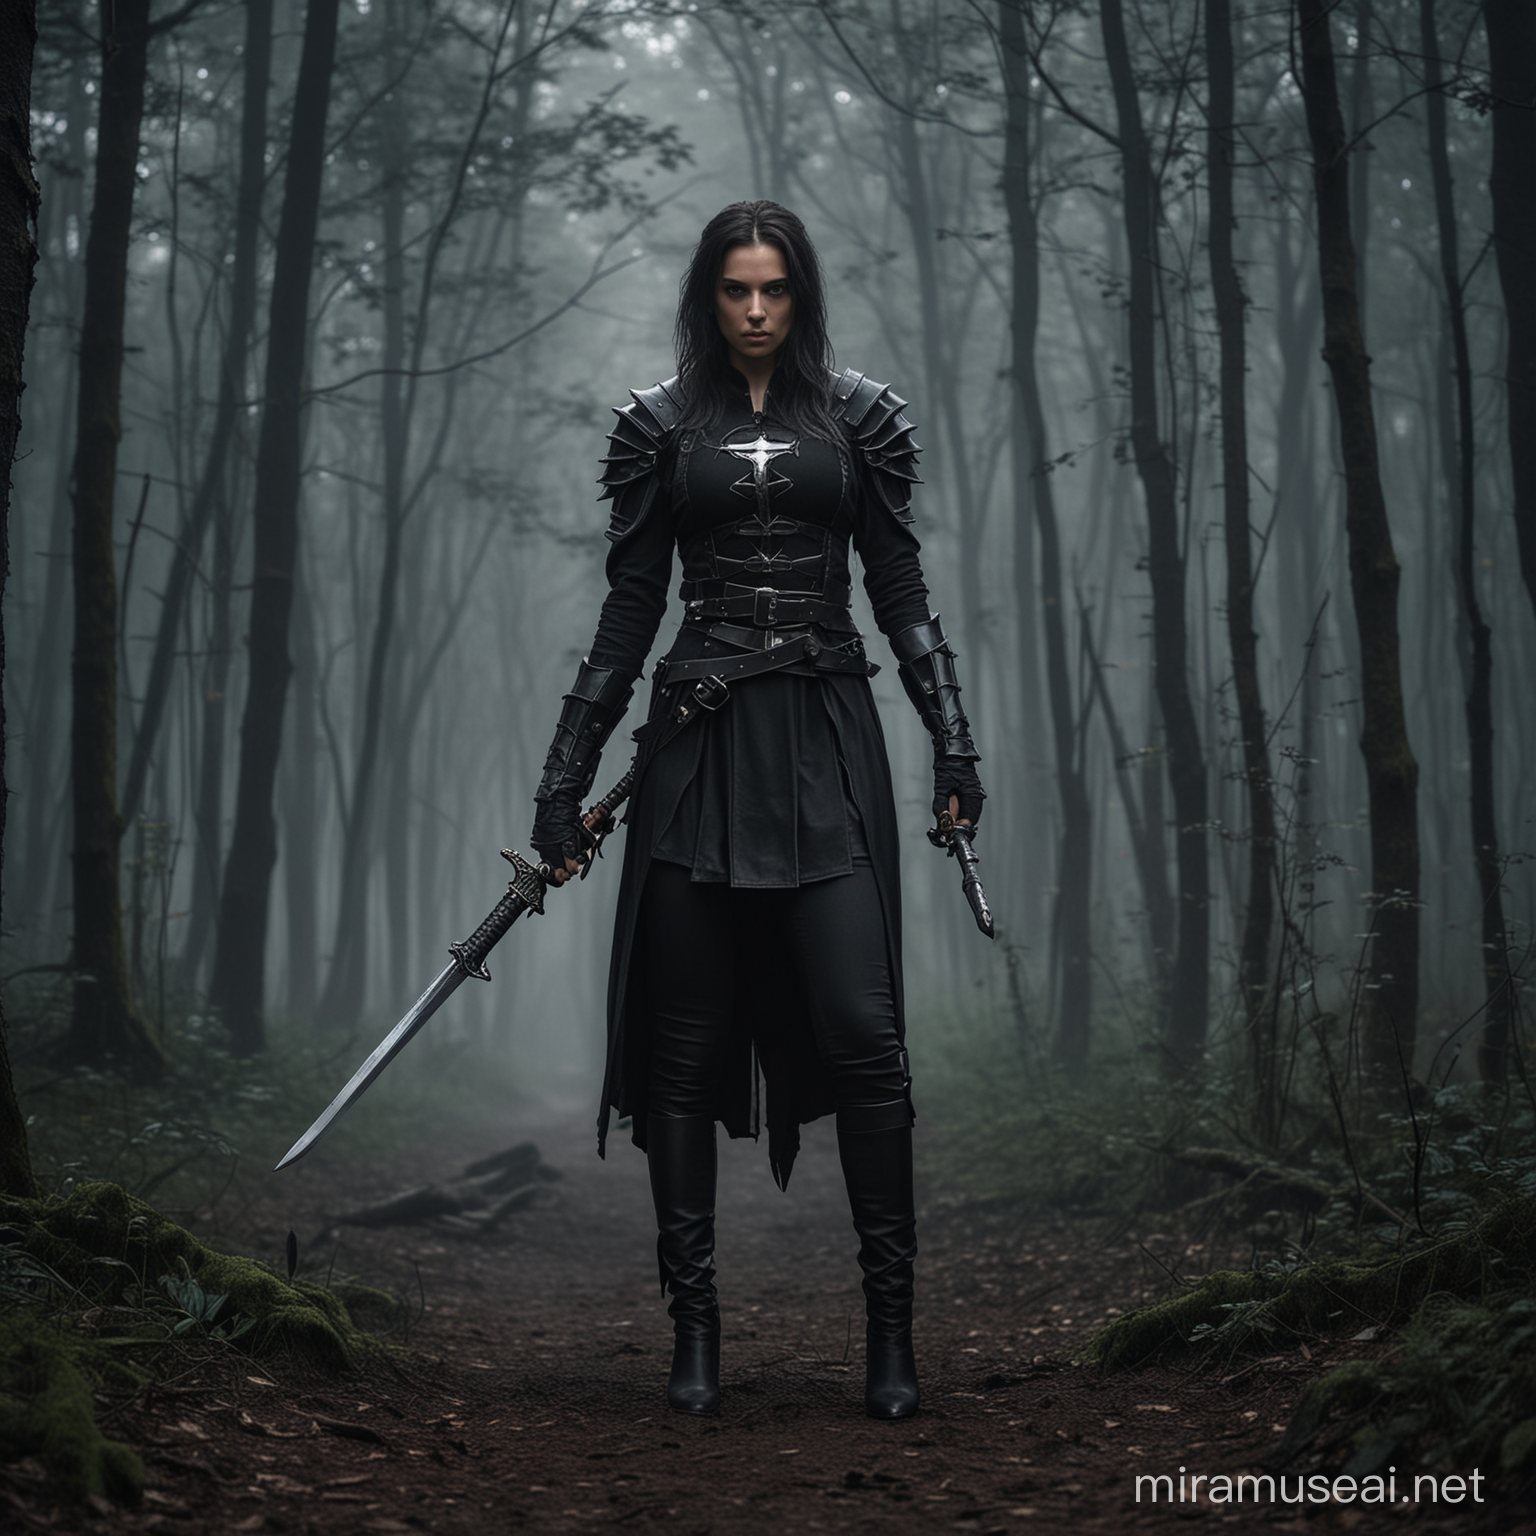 A fantasy woman worrior, wearing black clothes, holding a sword, wallk on the dark forest